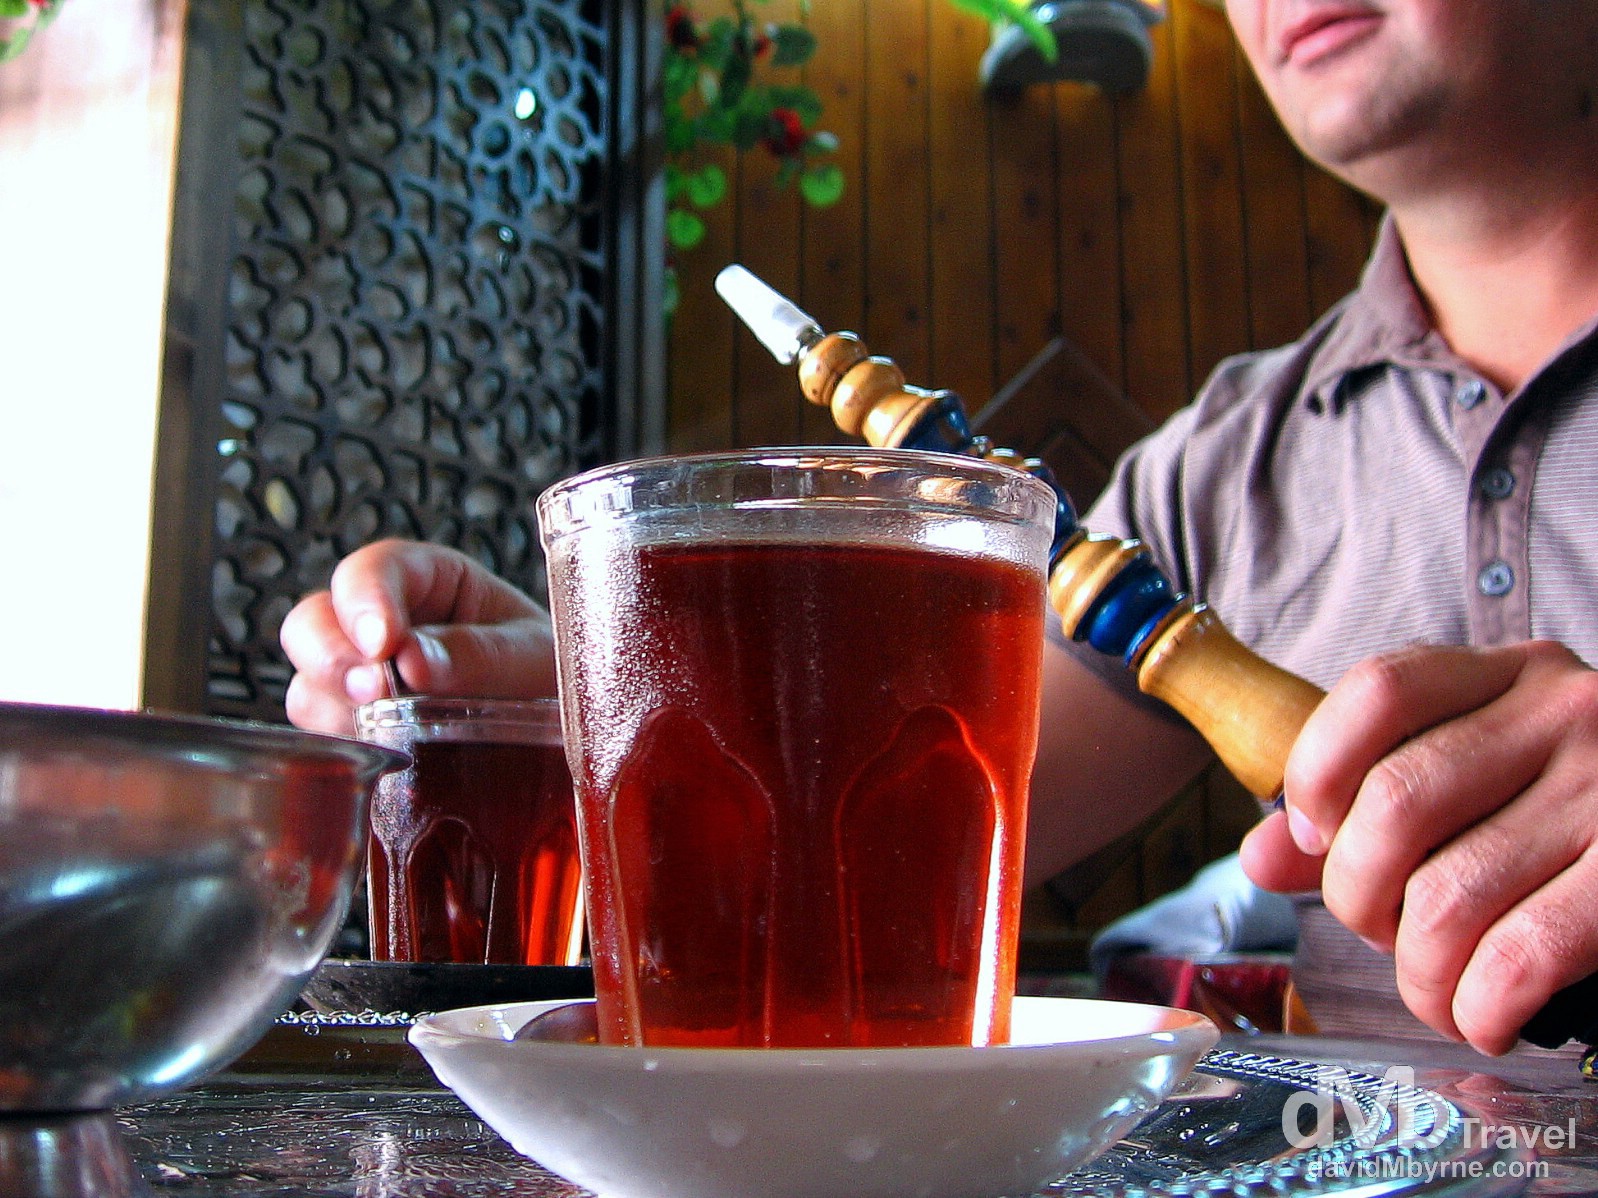 Tea & sheesha/hookah in a cafe in Damascus, Syria. May 4, 2008.